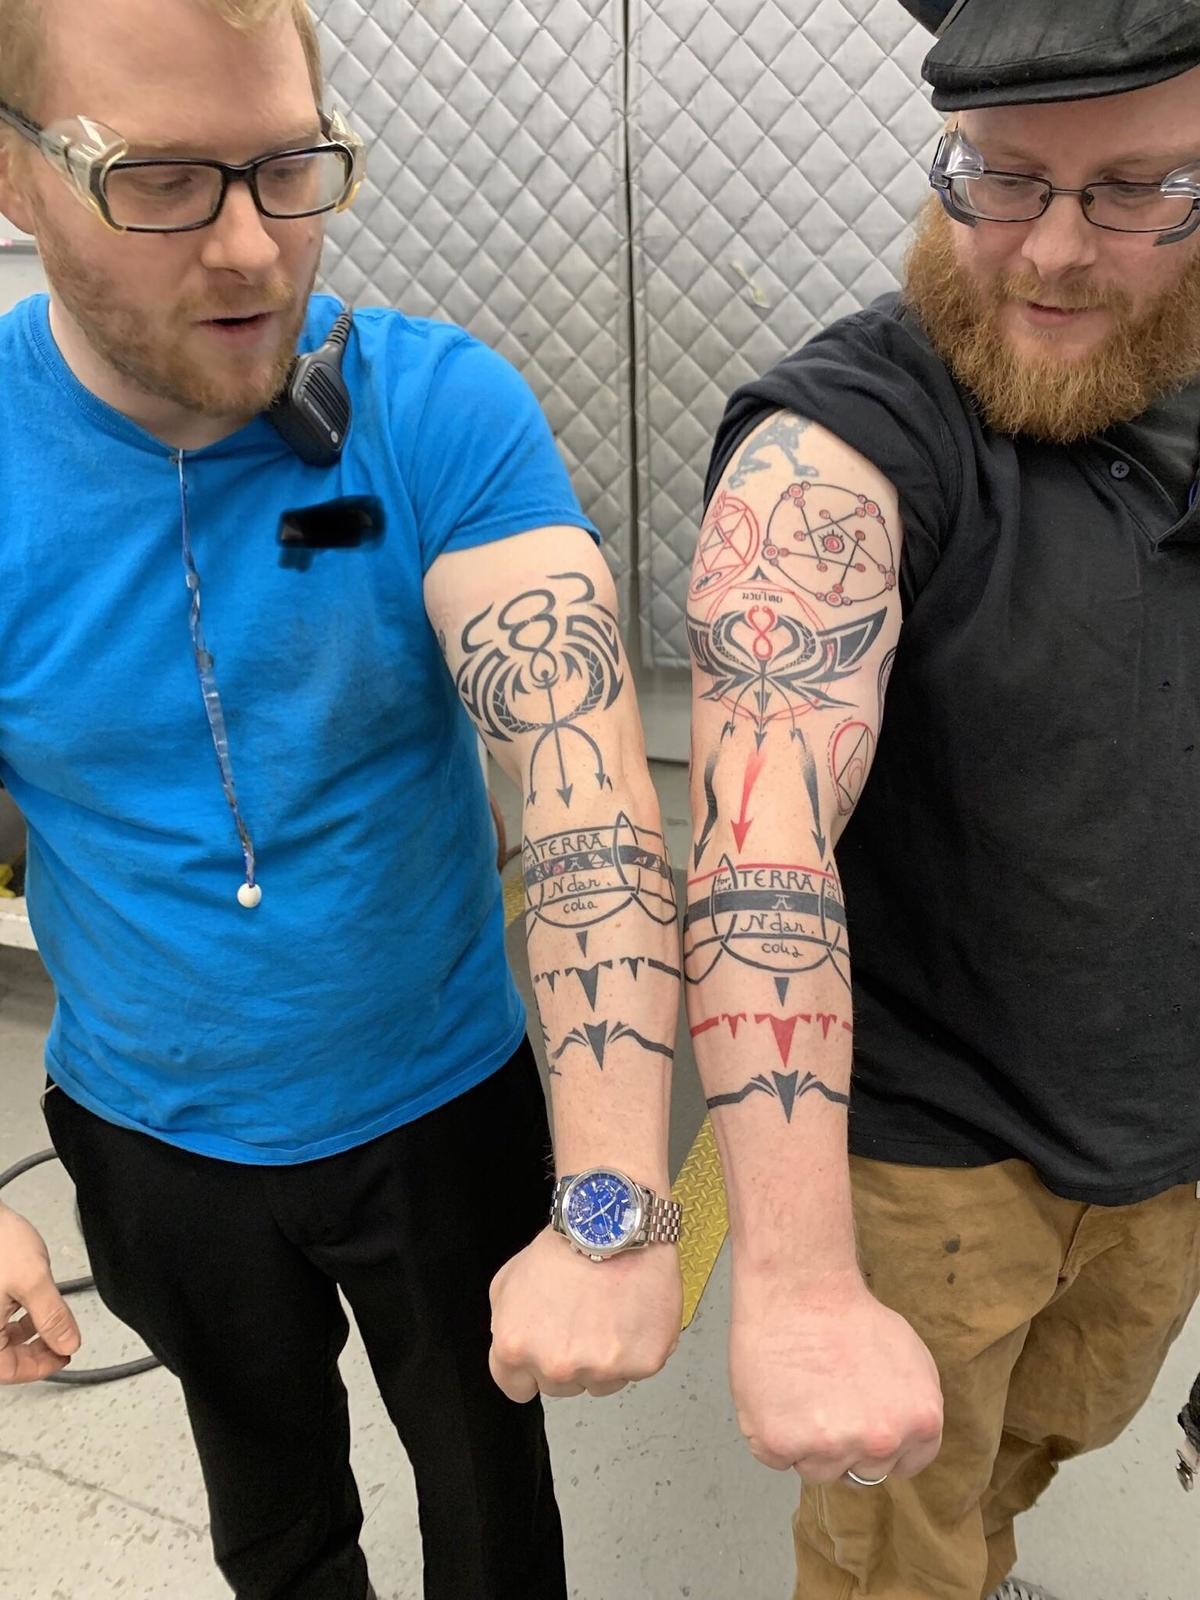 These twins Dwarf In the Flask Tatooes. join list: WeebTrash (455 subs)Mention History.. Now they gotta swap arms.